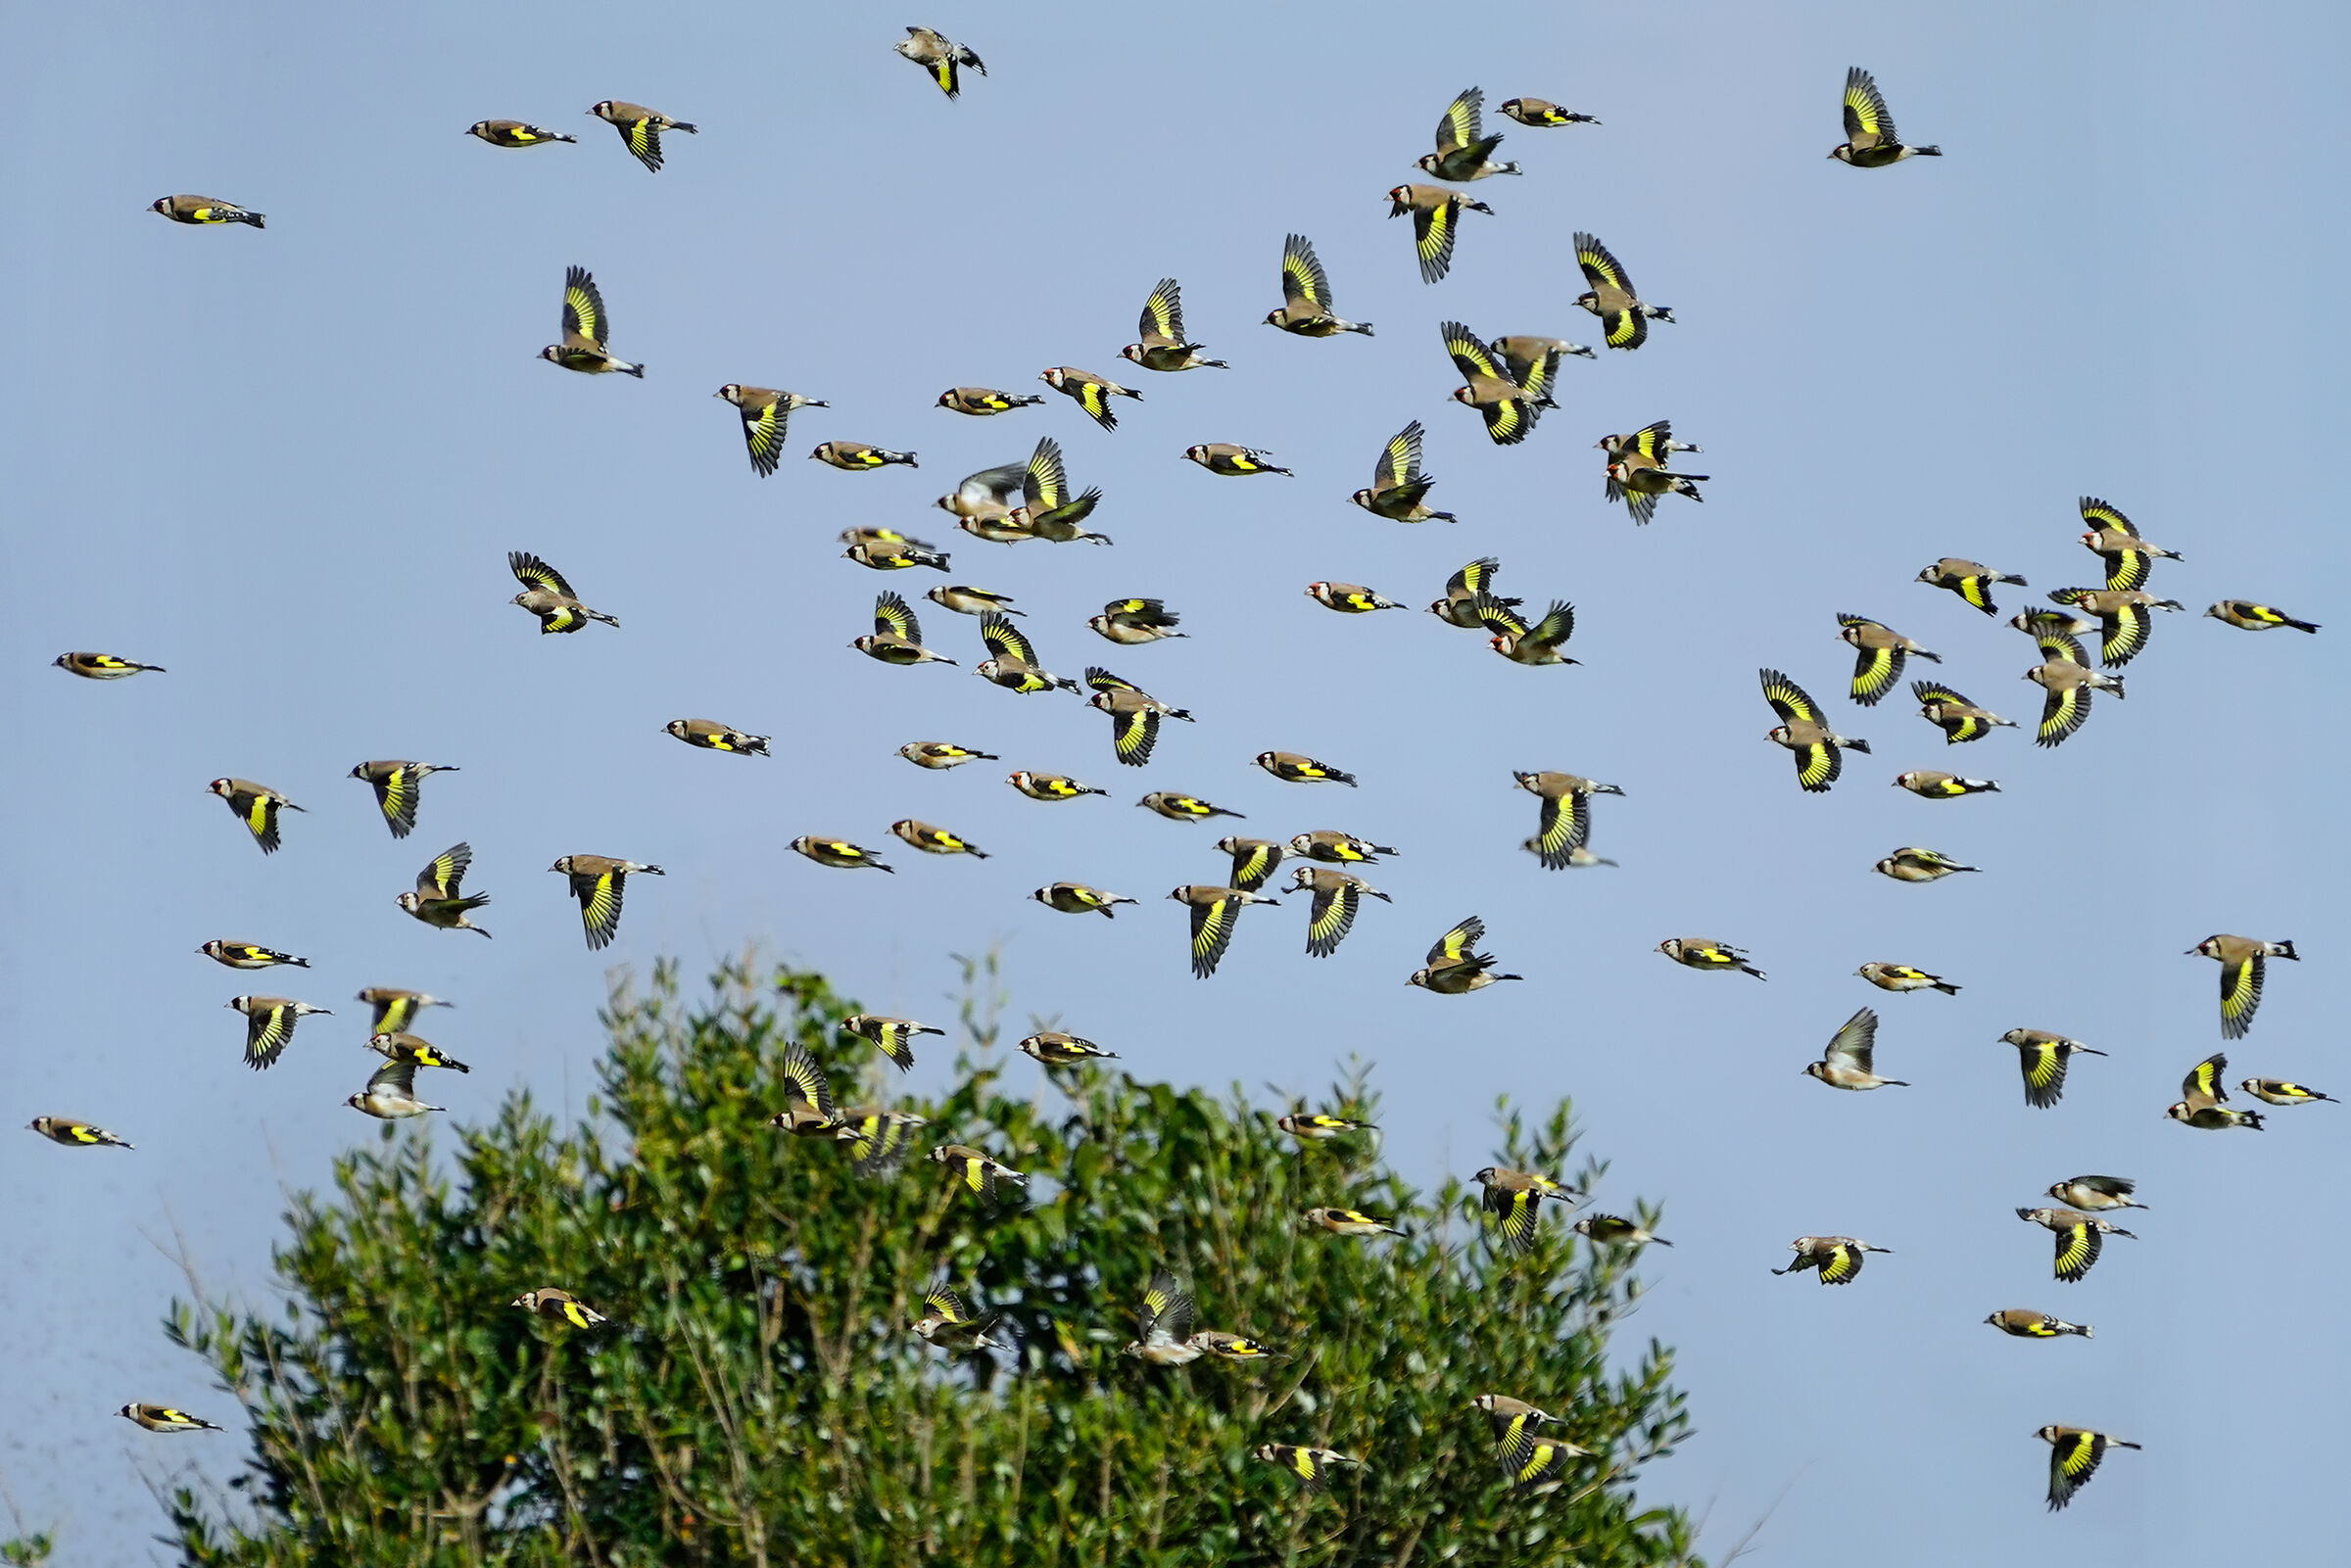 Goldfinches in autumn migration...